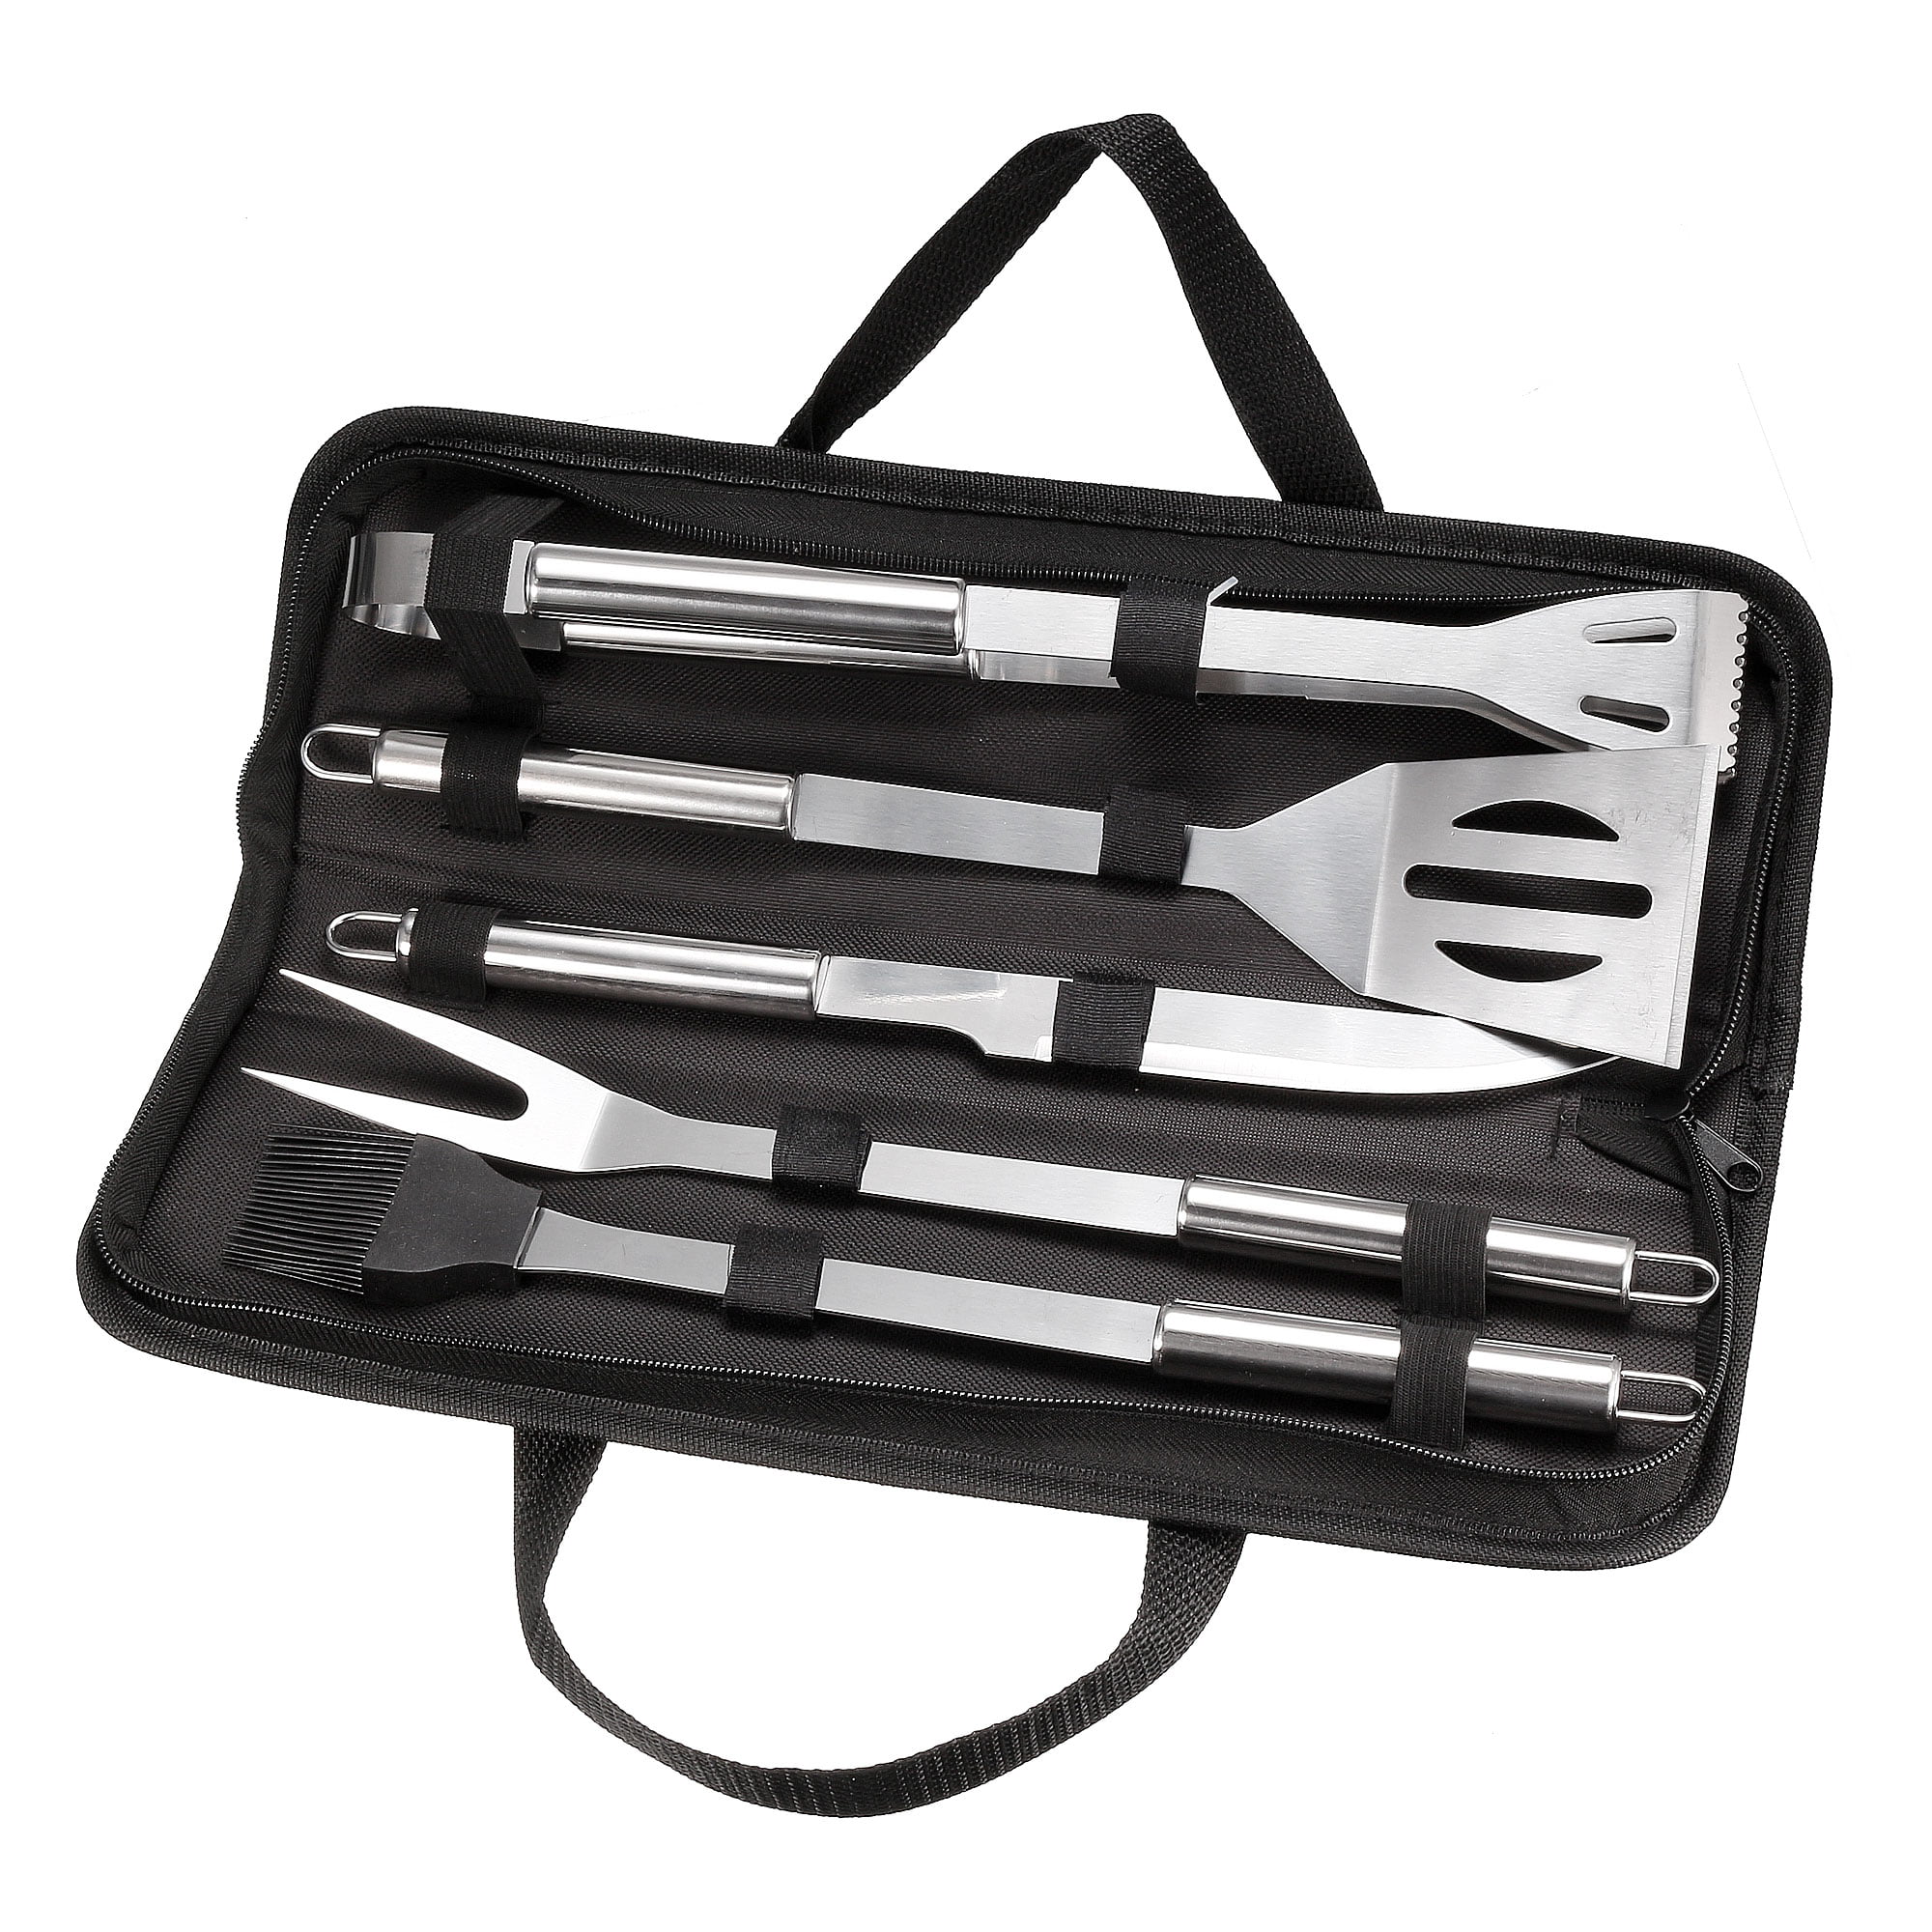 BBQ Grill Tool Set- 5 in 1 Stainless Steel Barbecue Grilling ...